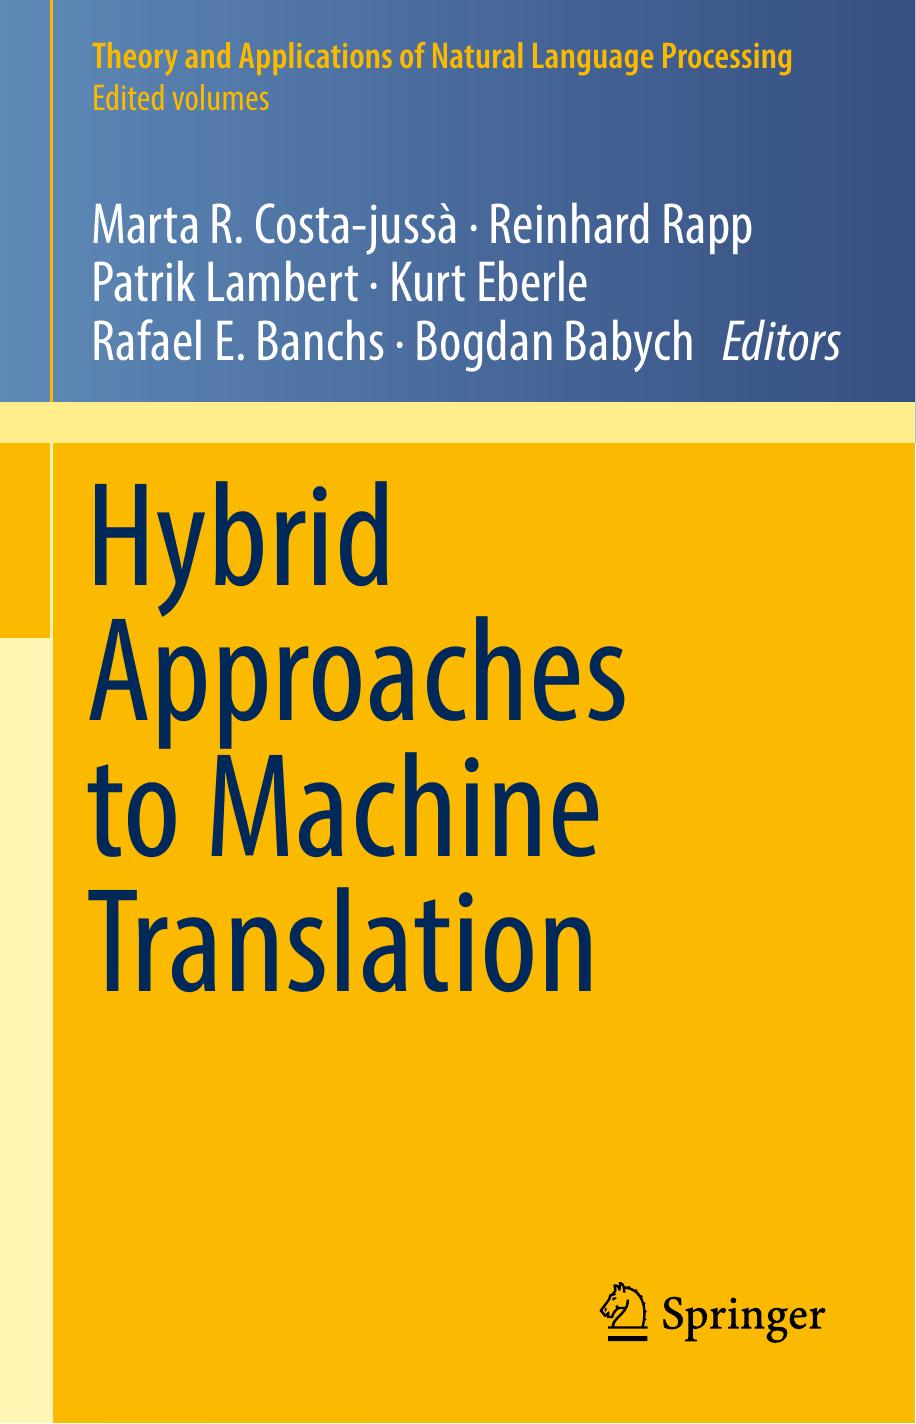 Hybrid Approaches to Machine Translation (Theory and Applications of Natural Language Processing)